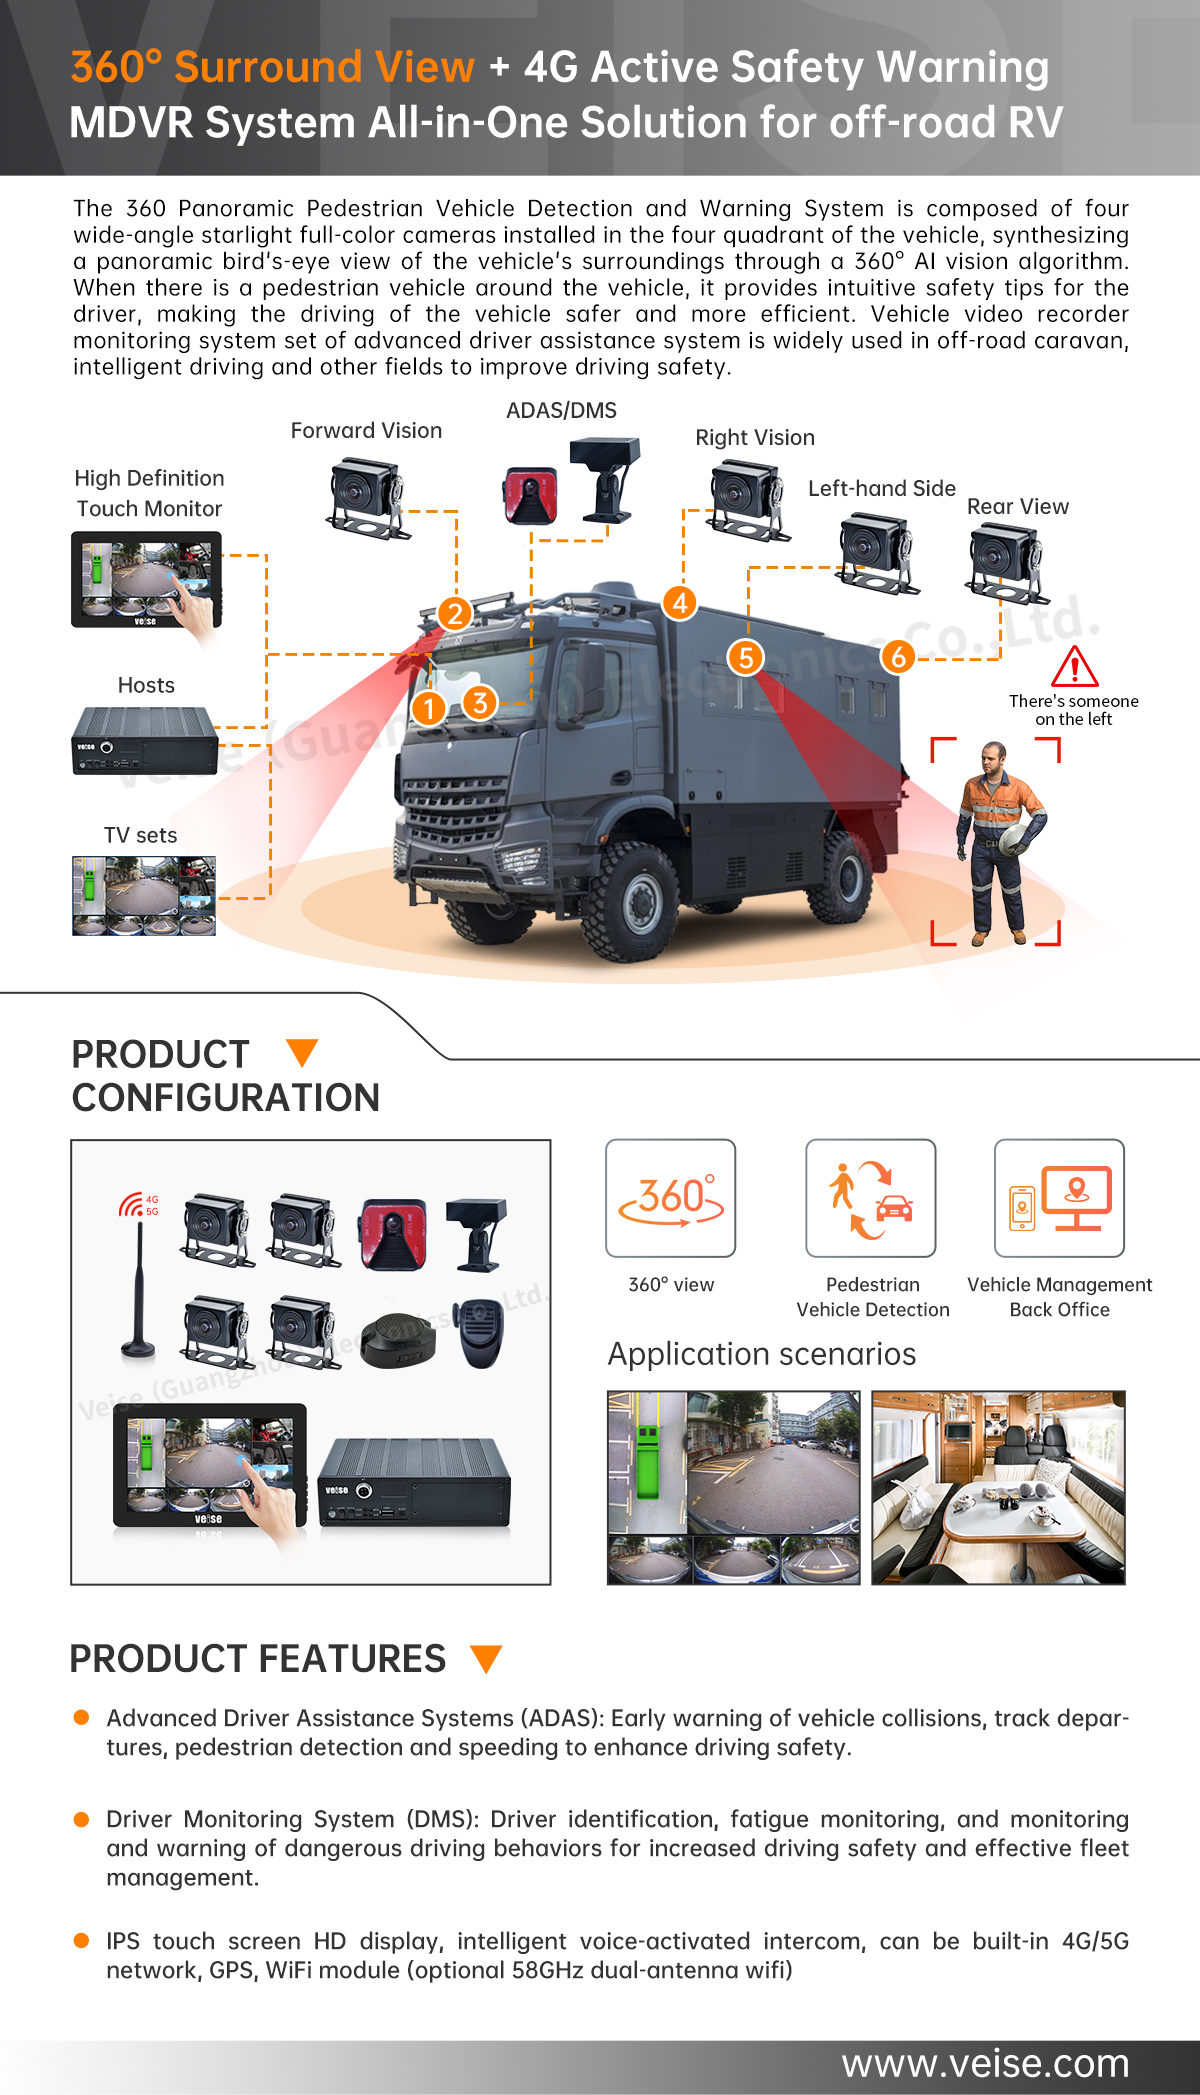 360° Surround View + 4G Active Safety Warning MDVR System All-in-One Solution for off-road RV